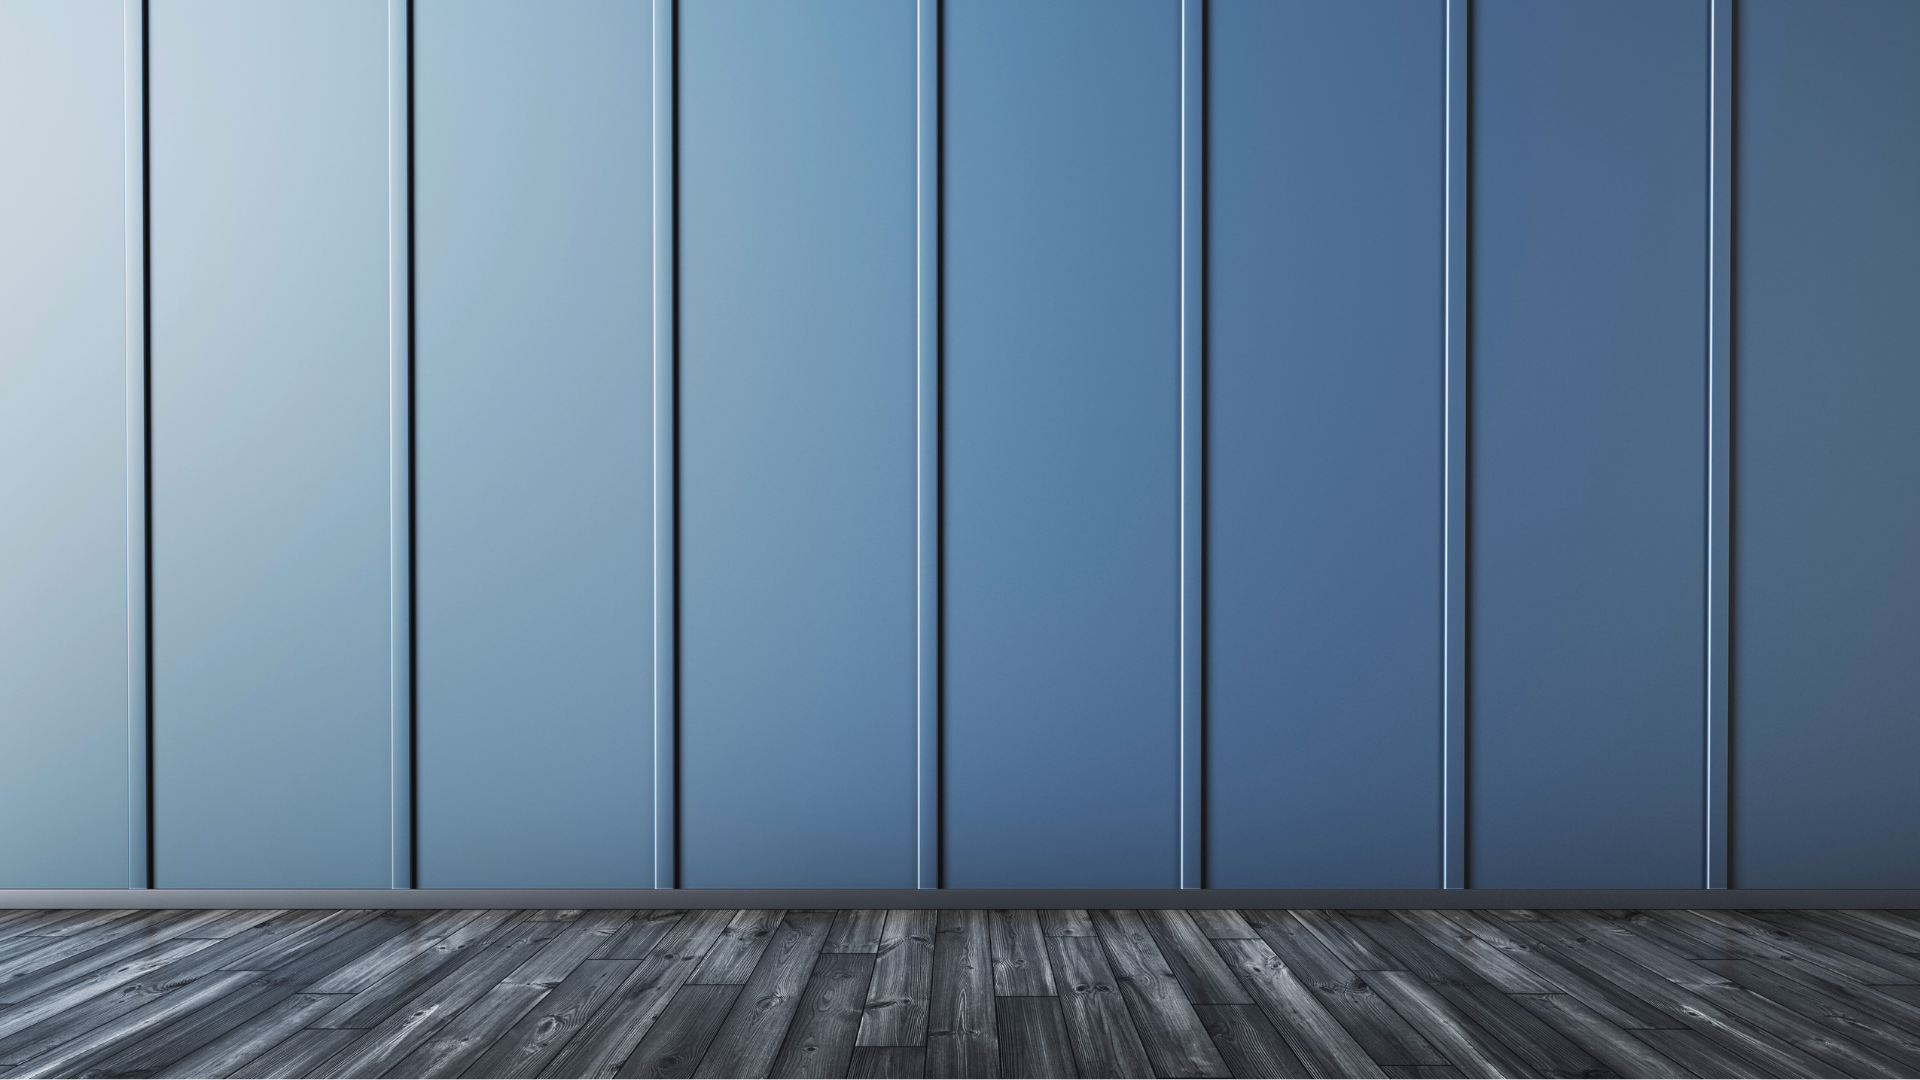 3D Rendering of Thin Battens on Blue Wall with Grey Luxury Vinyl Plank Flooring